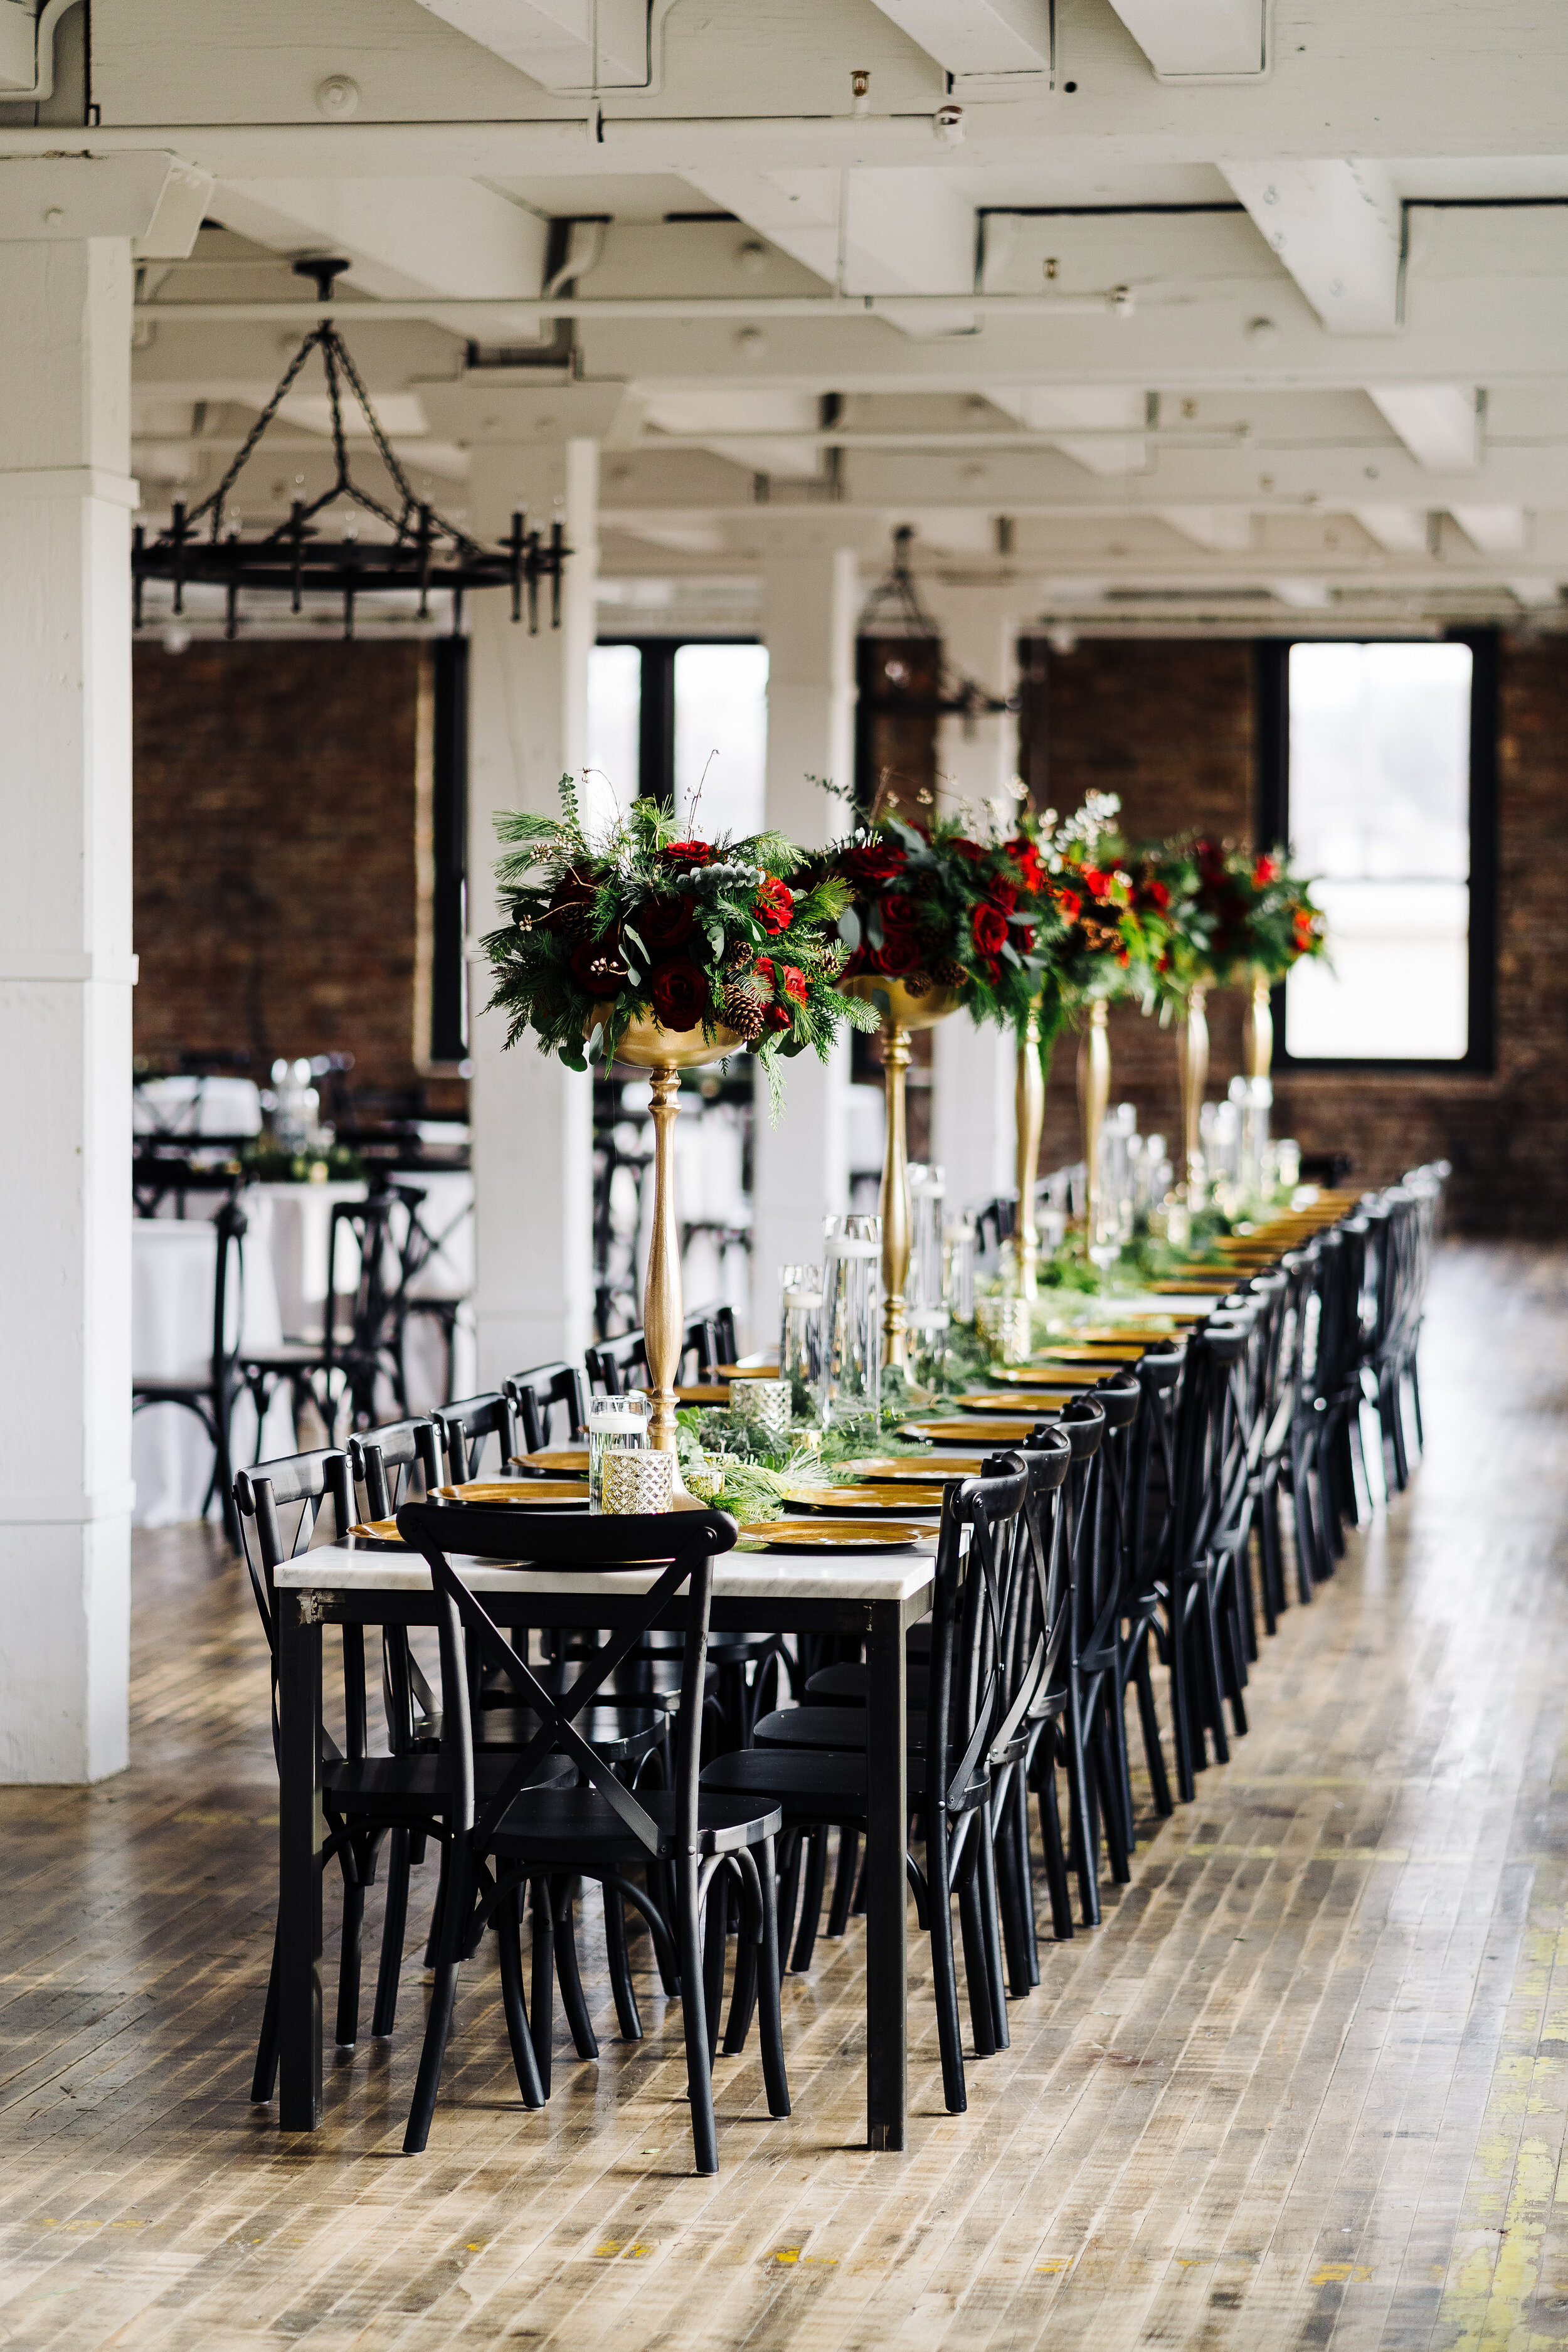 Luxury Winter Wonderland Wedding at Company 251 featured on CHI thee WED